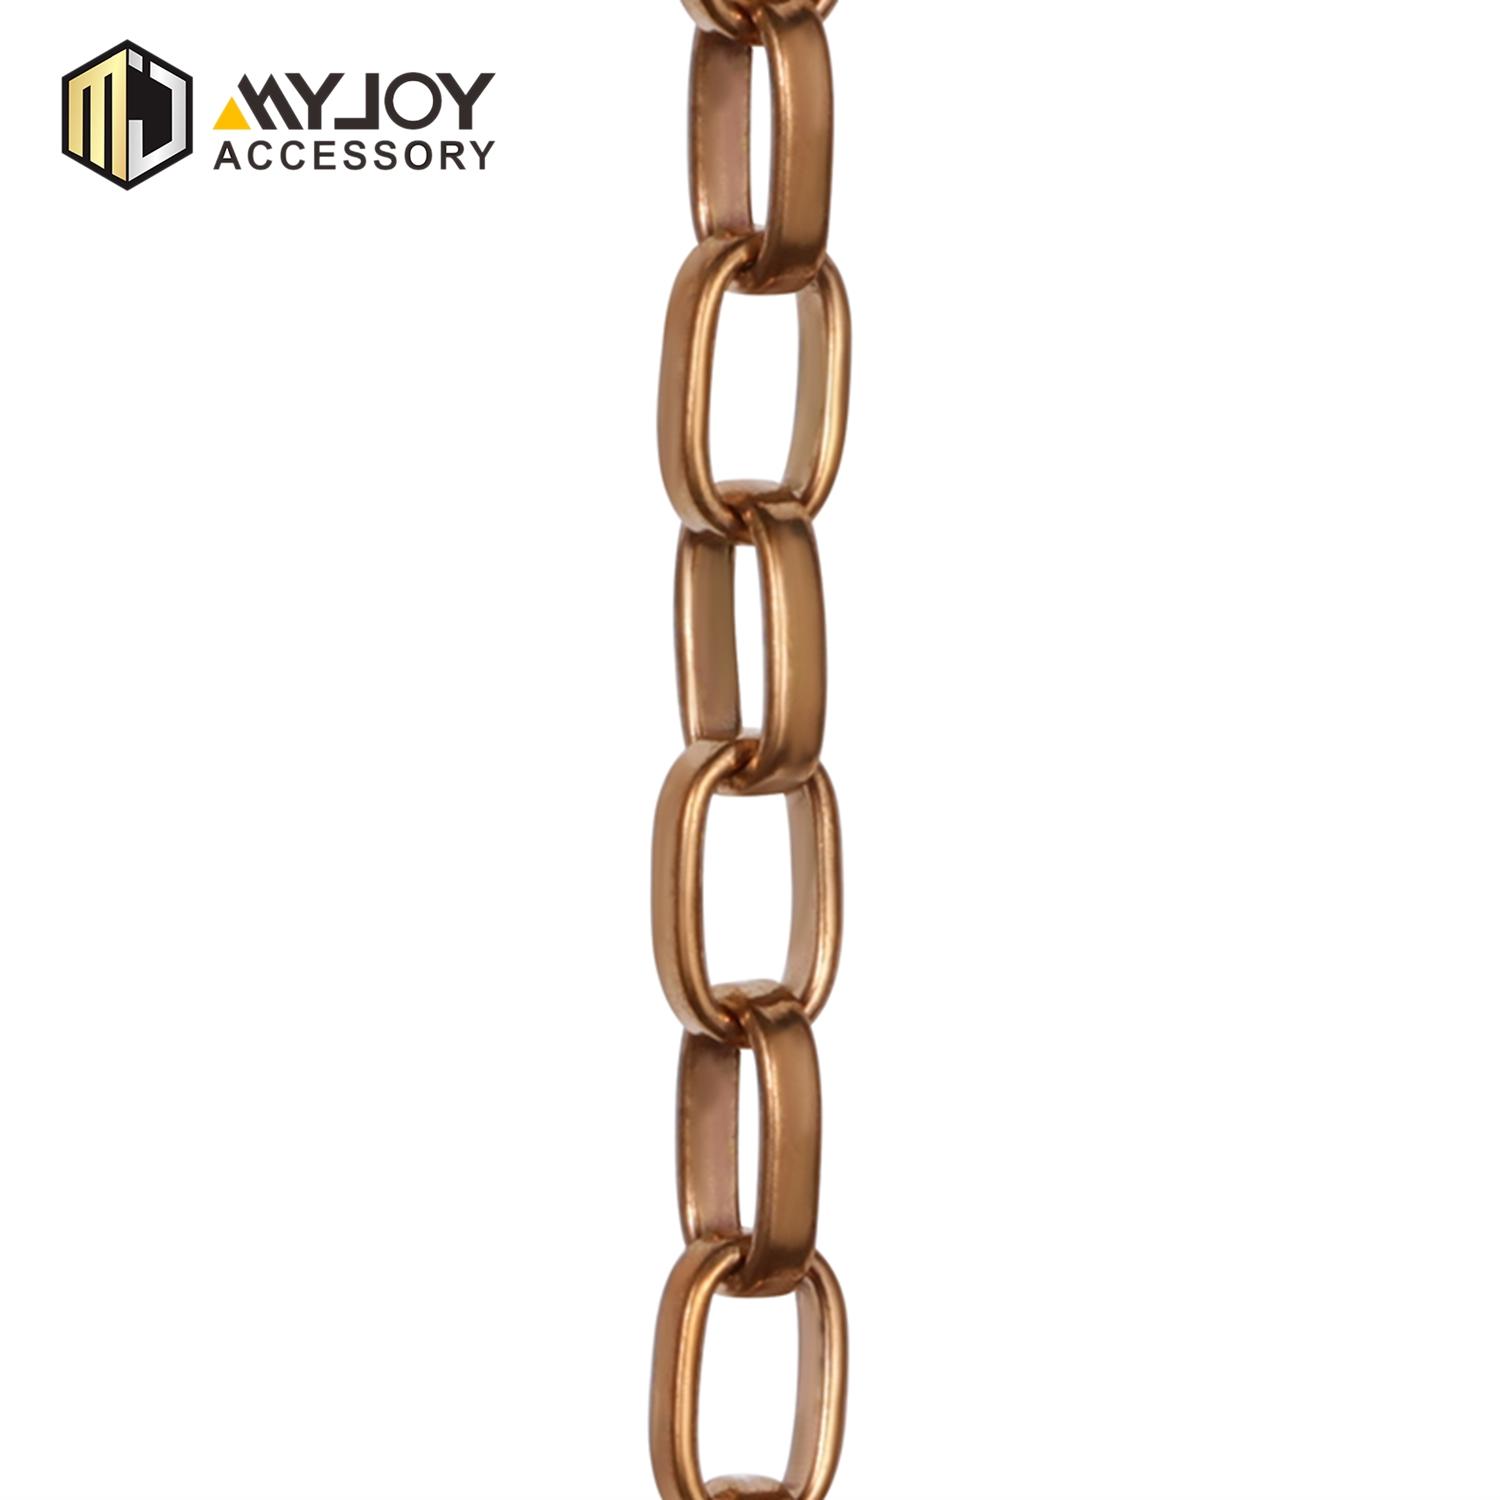 MYJOY Top purse chain for sale for bags